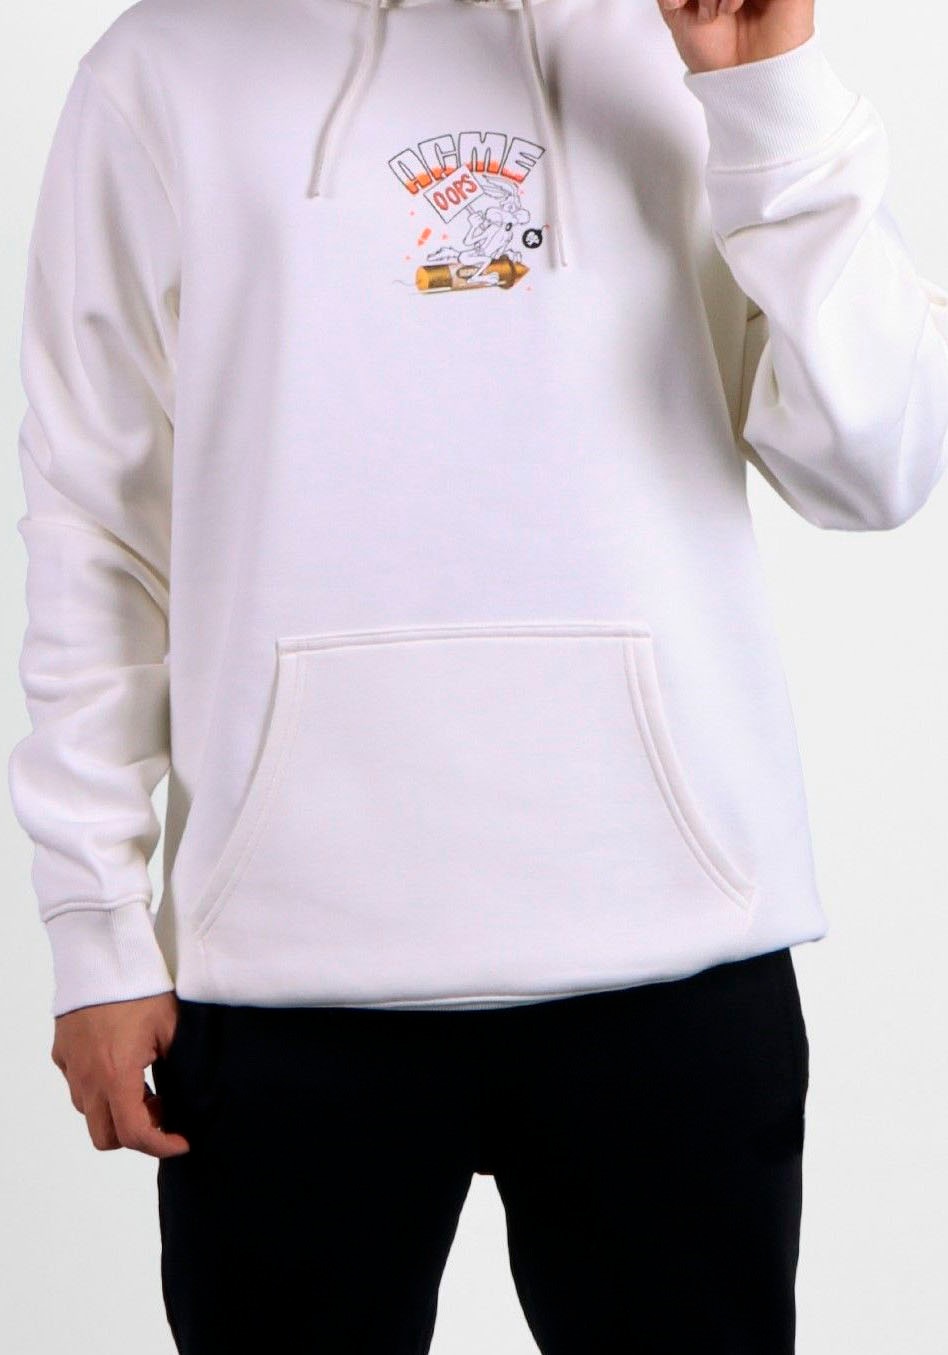 Capelli New York Hoodie, "ACME Wile E. Coyote on a rocket"